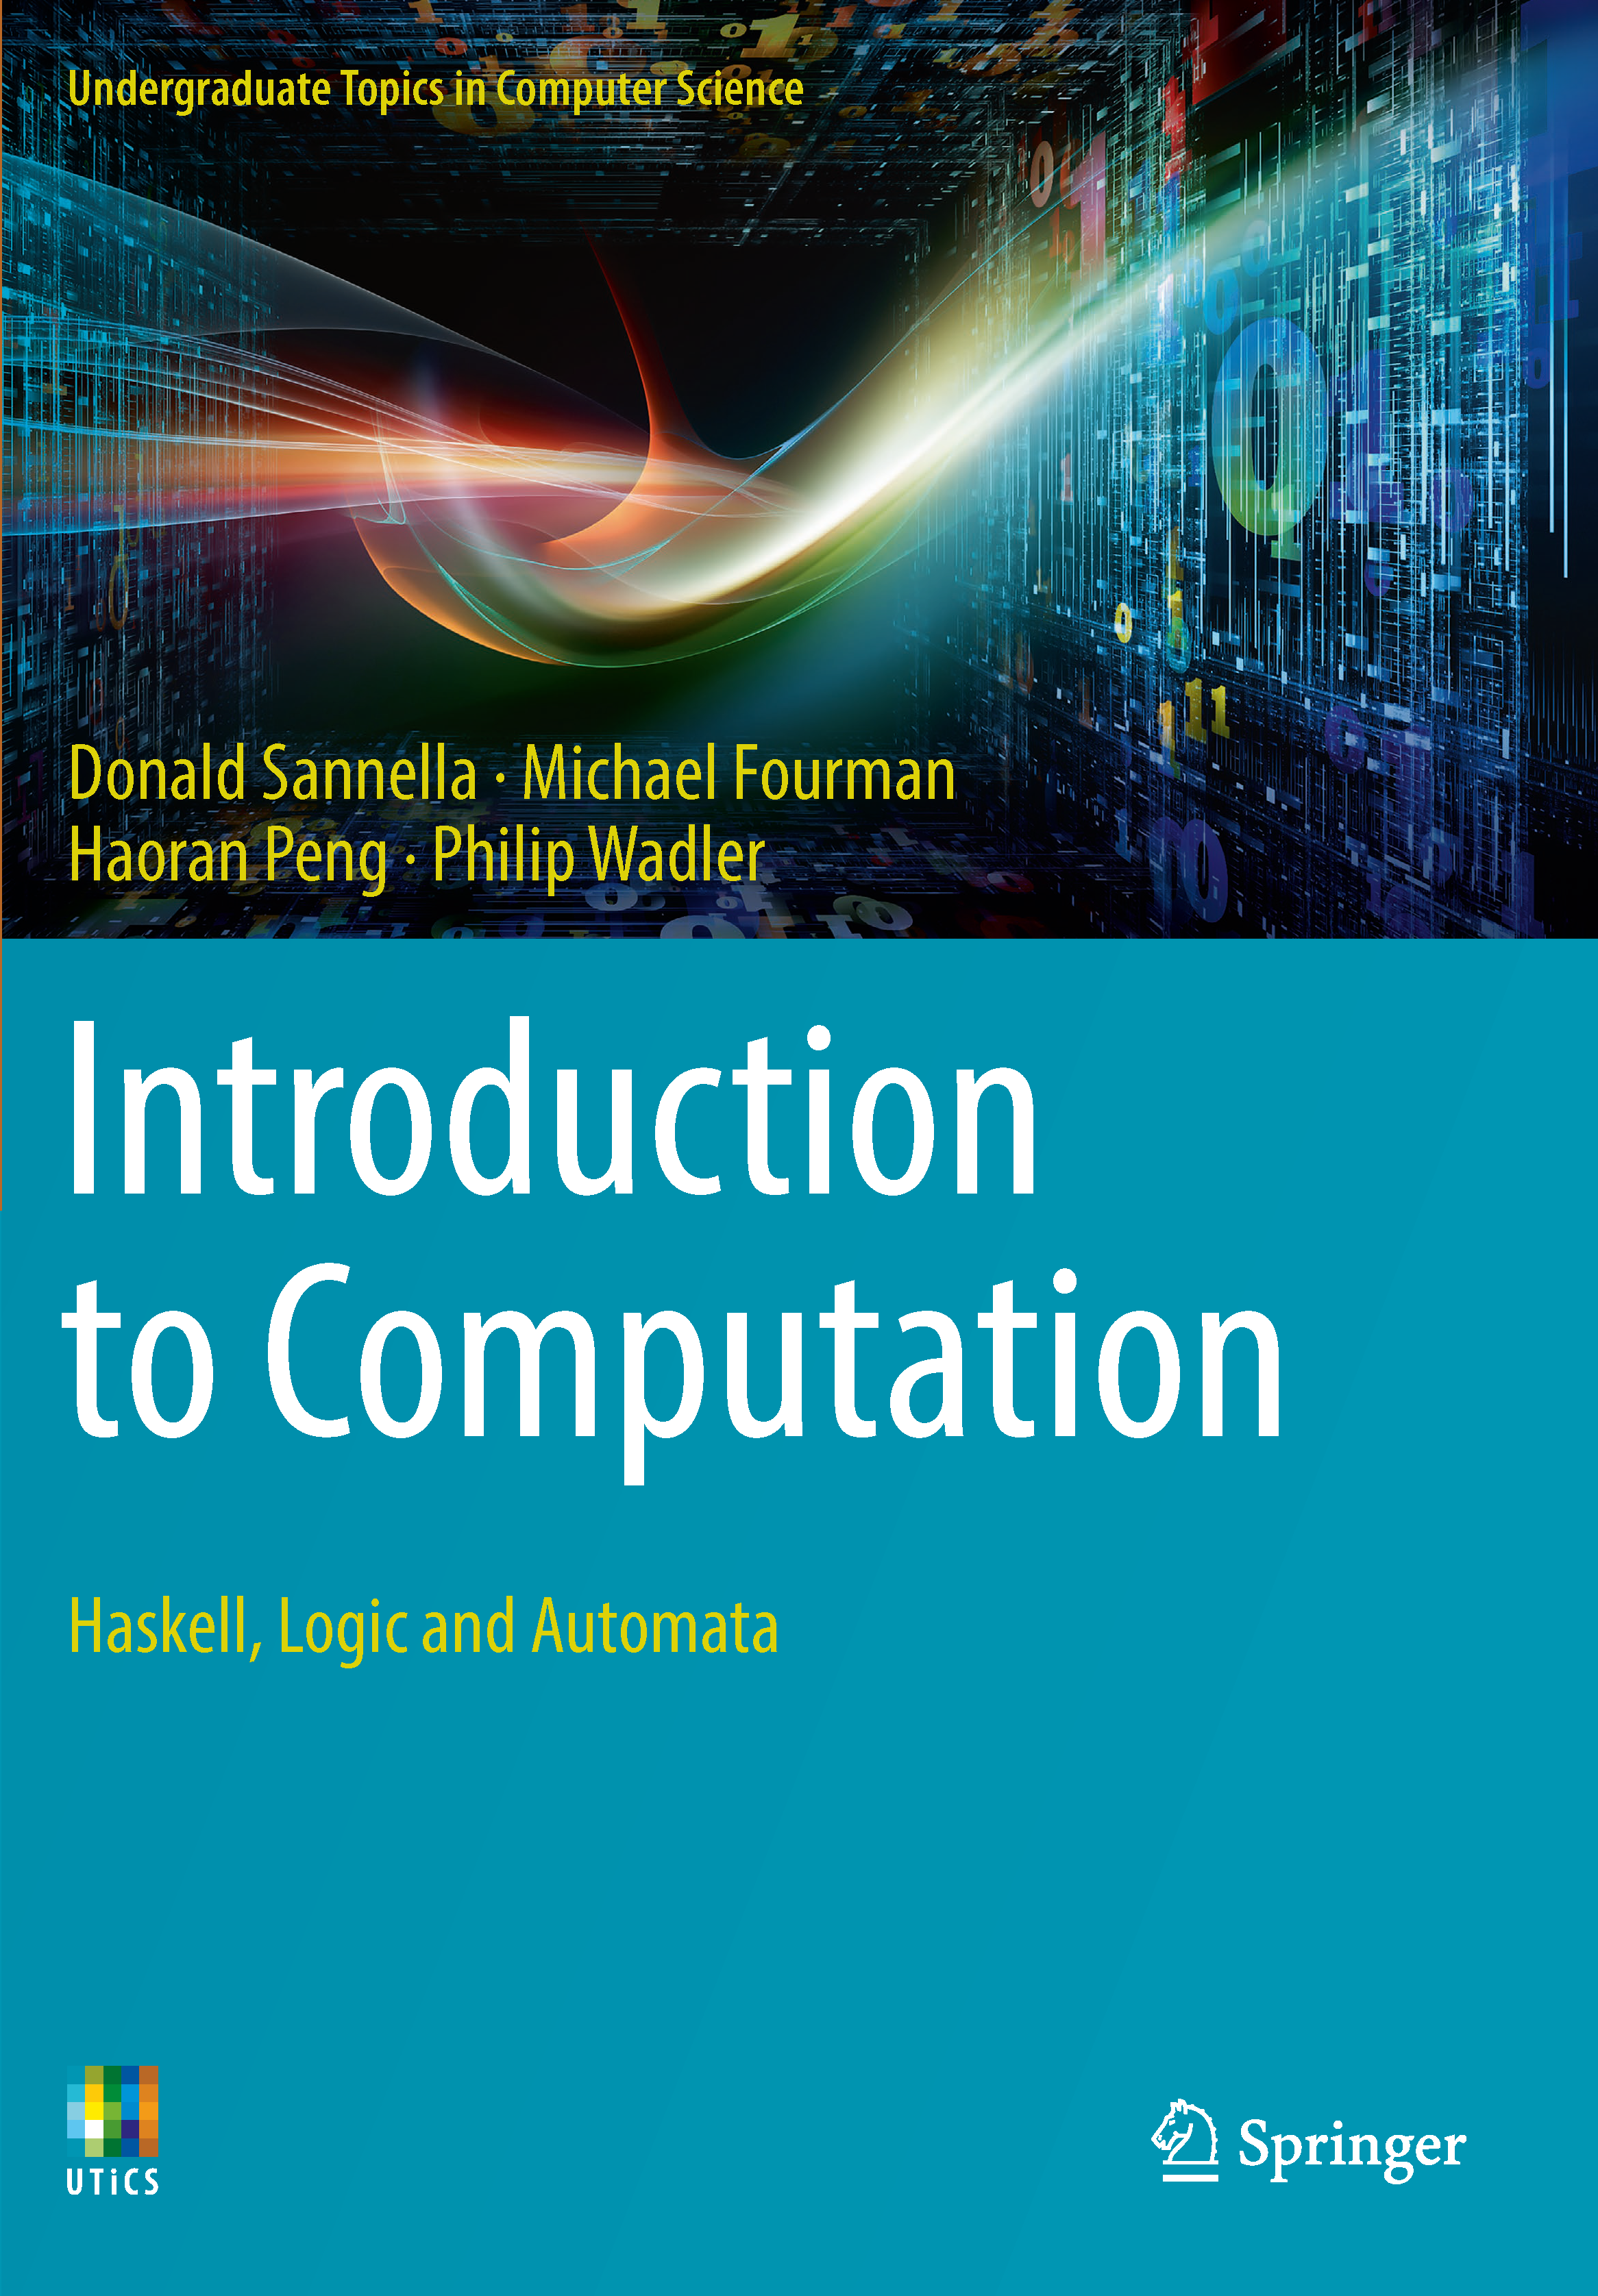 Introduction to Computation book cover